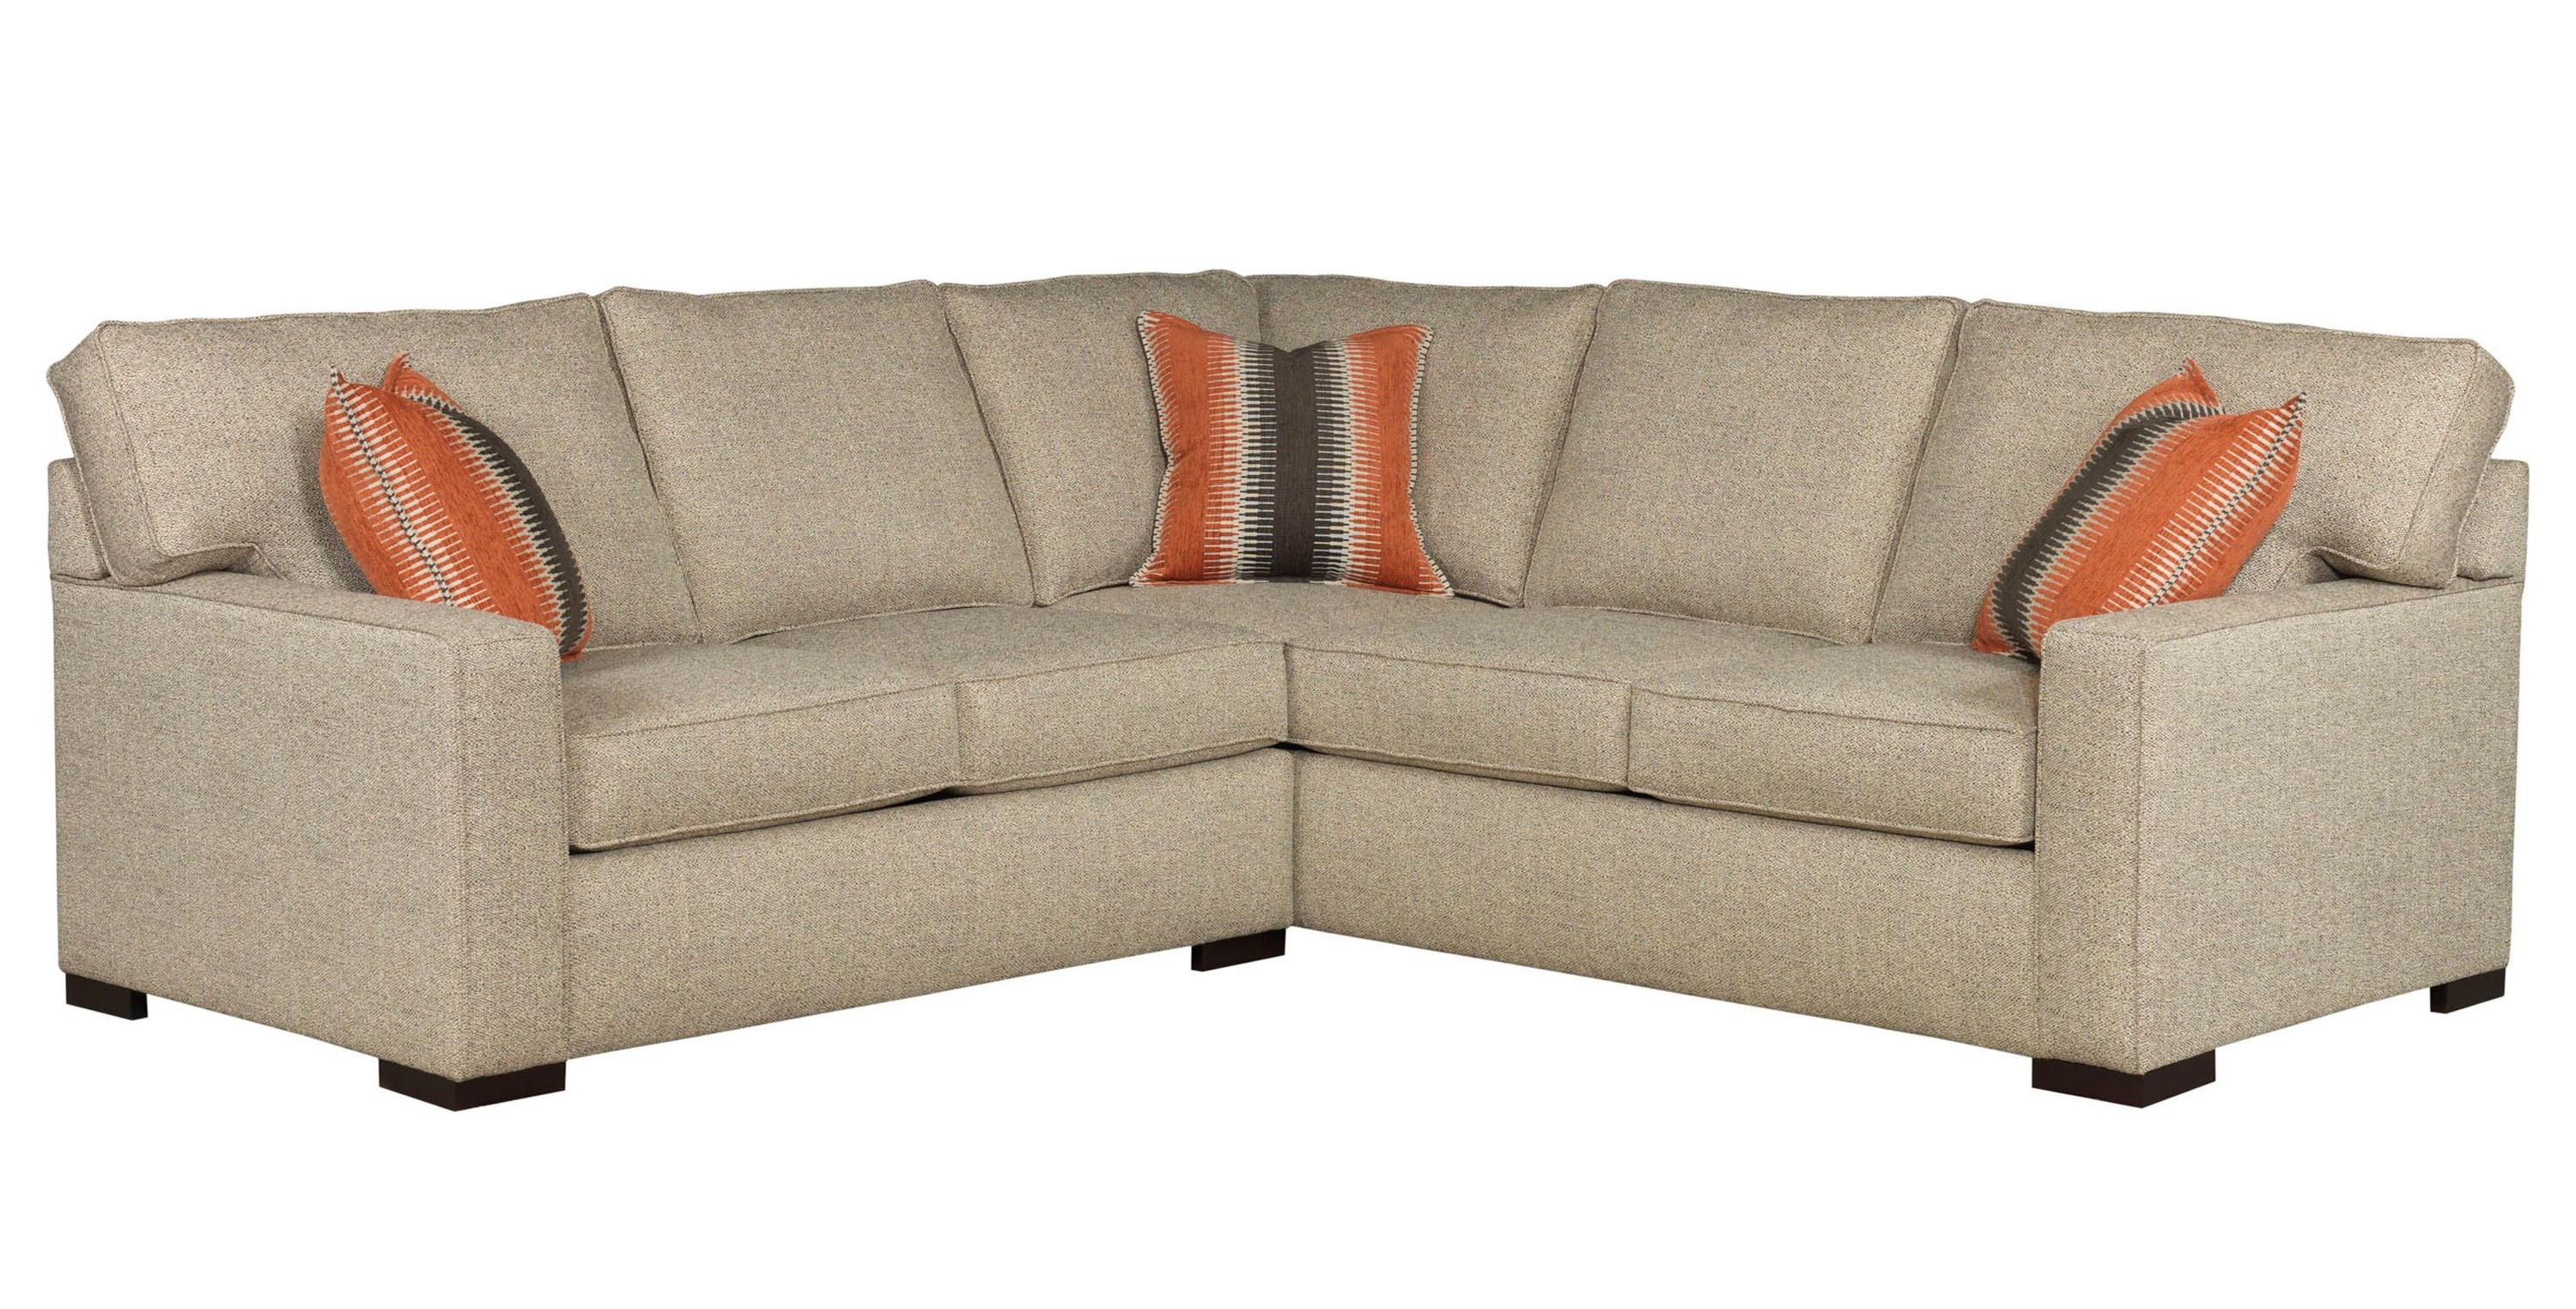 Broyhill Furniture Raphael Contemporary Two Piece Sectional Sofa In Most Recent Meyer 3 Piece Sectionals With Raf Chaise (View 19 of 20)